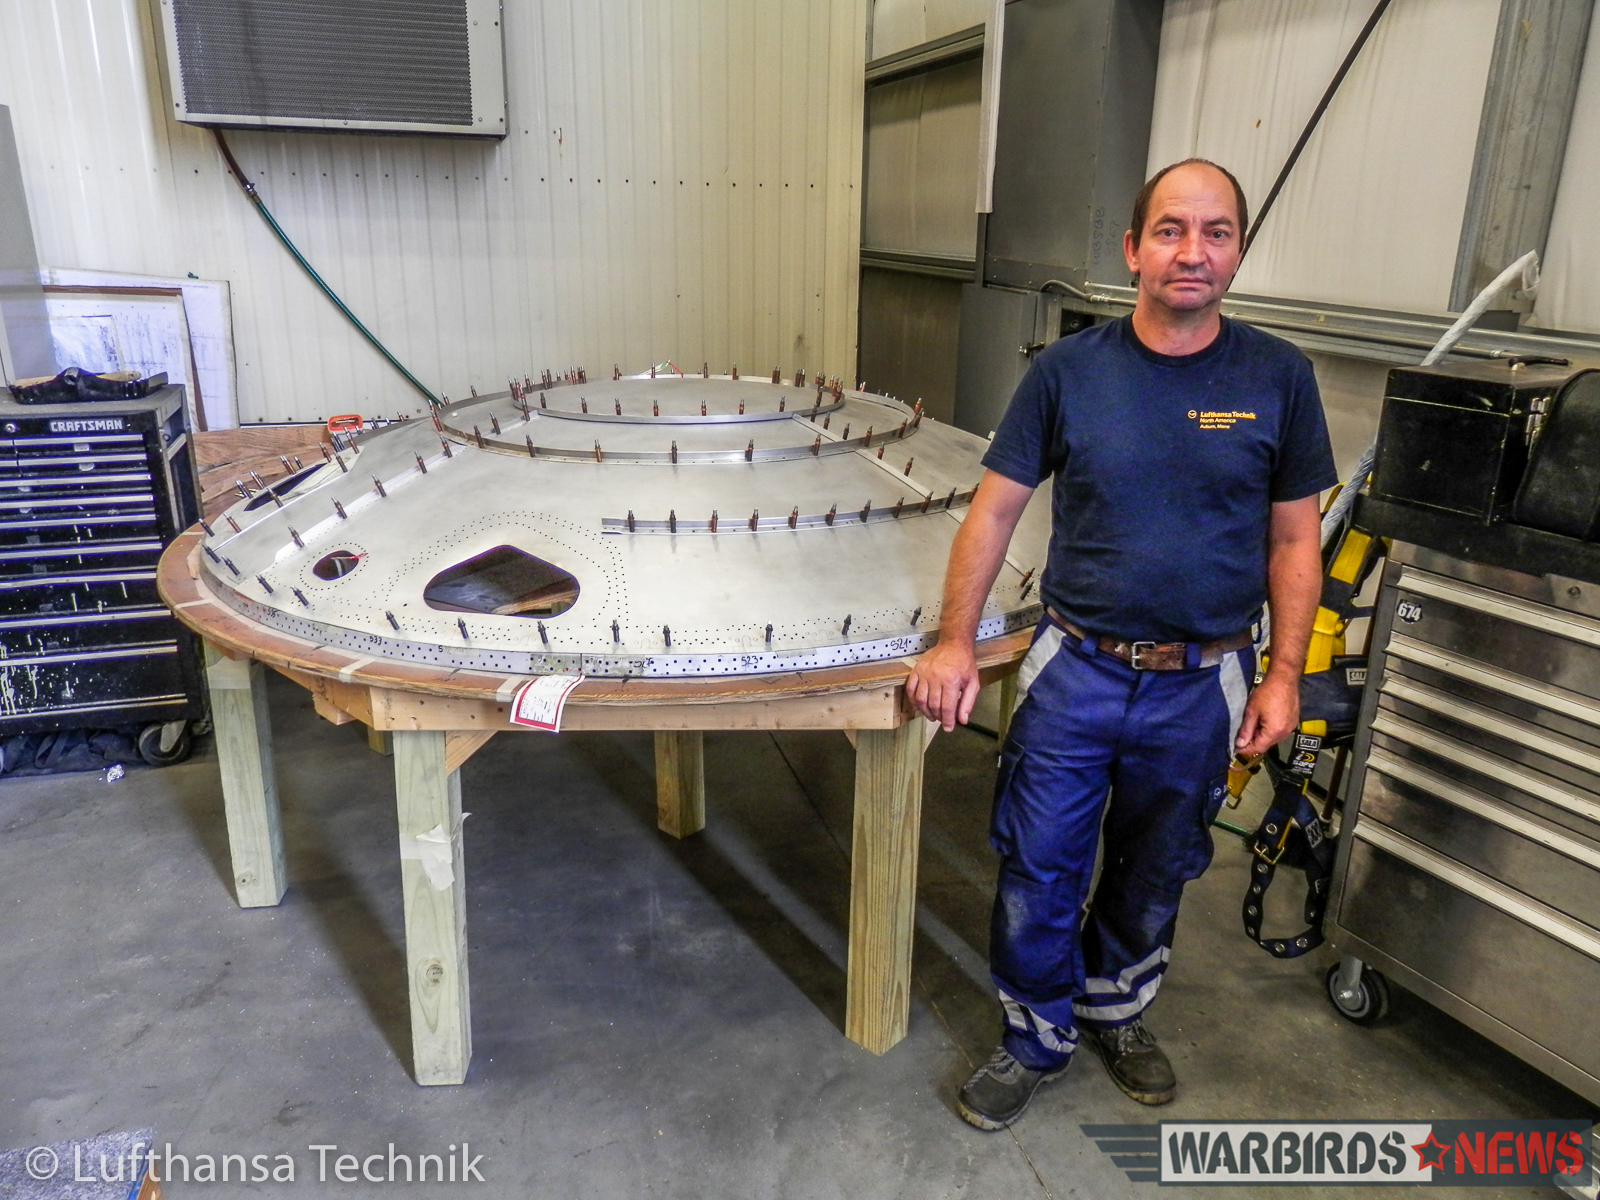 Master sheet metal specialist, Gyula Nagy of Lufthansa Technik Budapest standing in front of the rear fuselage pressure bulkhead he remanufactured in Lewiston, Maine. (© Lufthansa Technik)